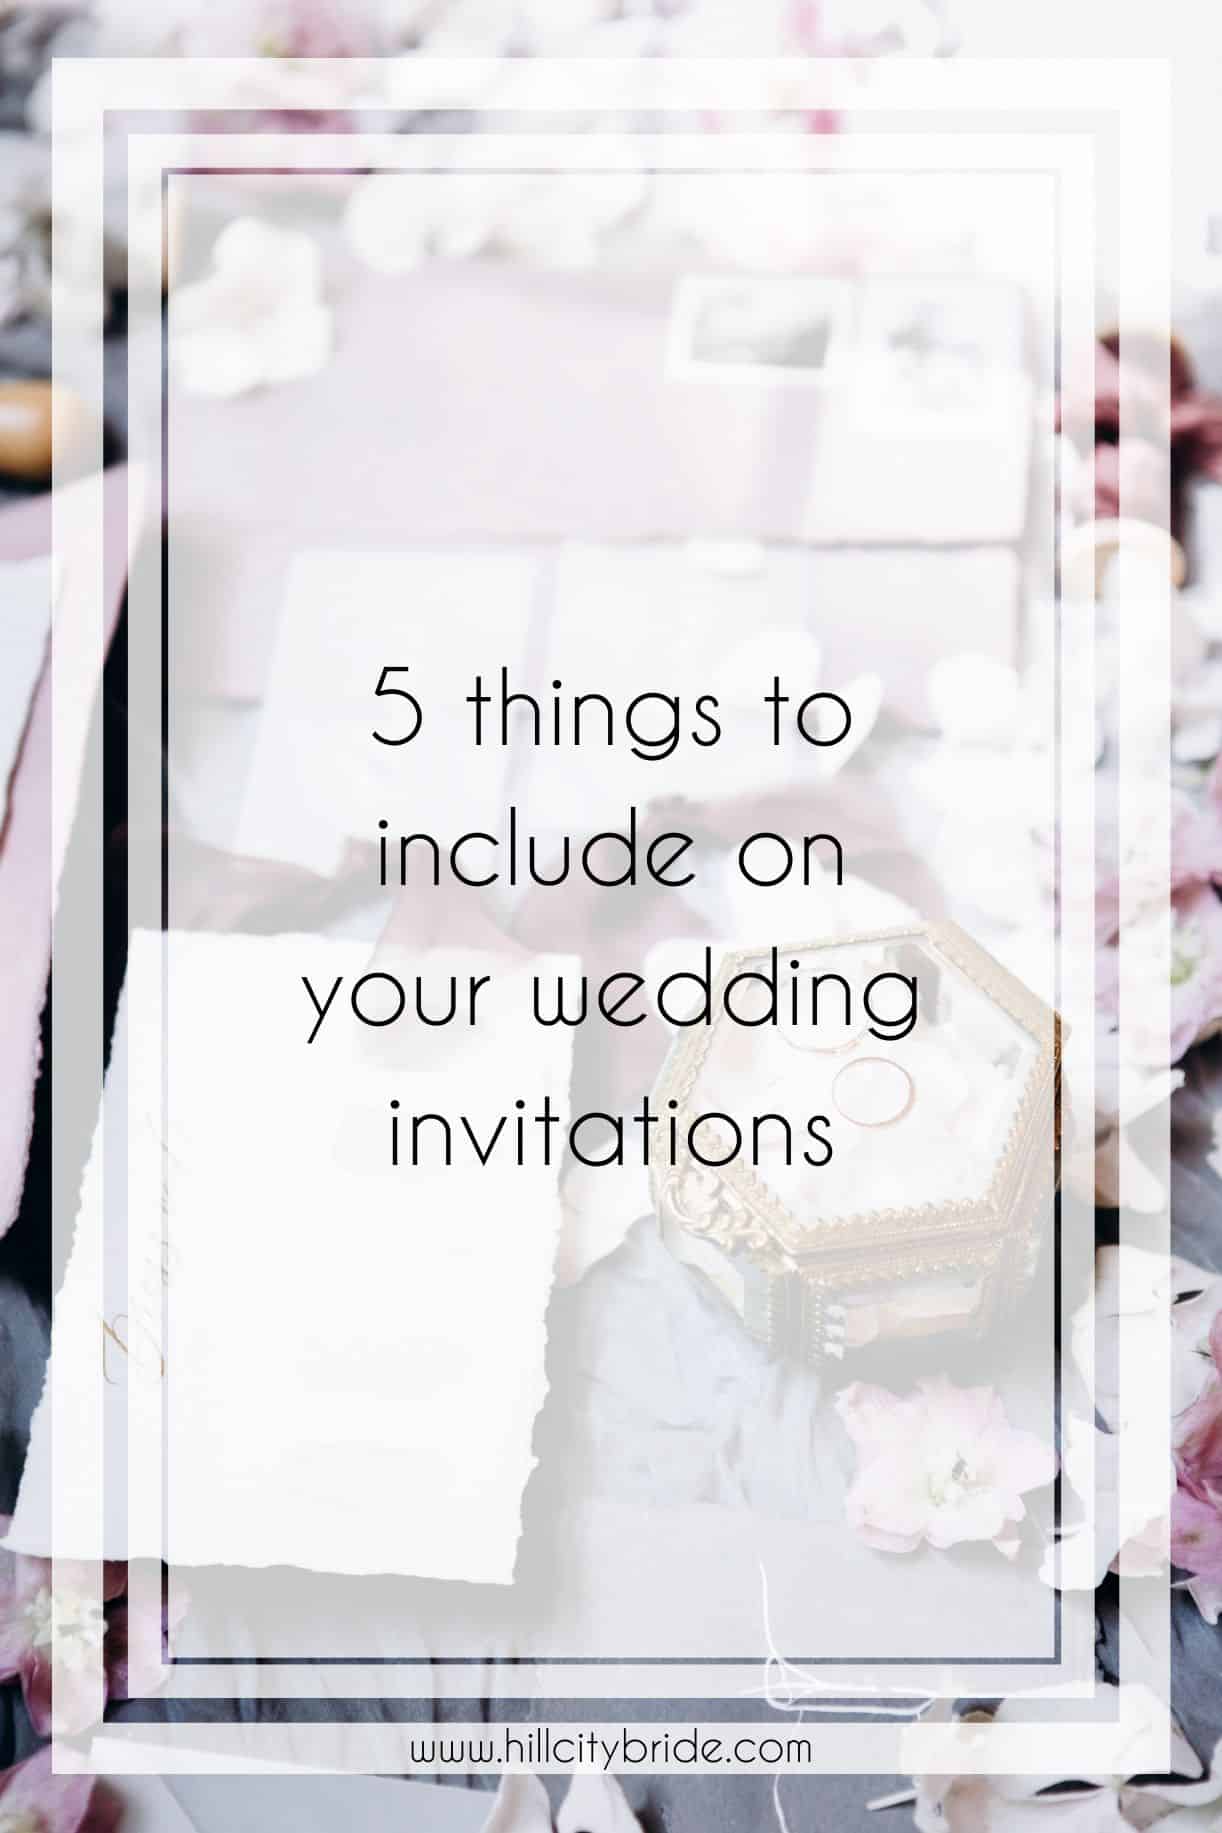 5 Absolutely Essential Things to Include on Your Wedding Invitations